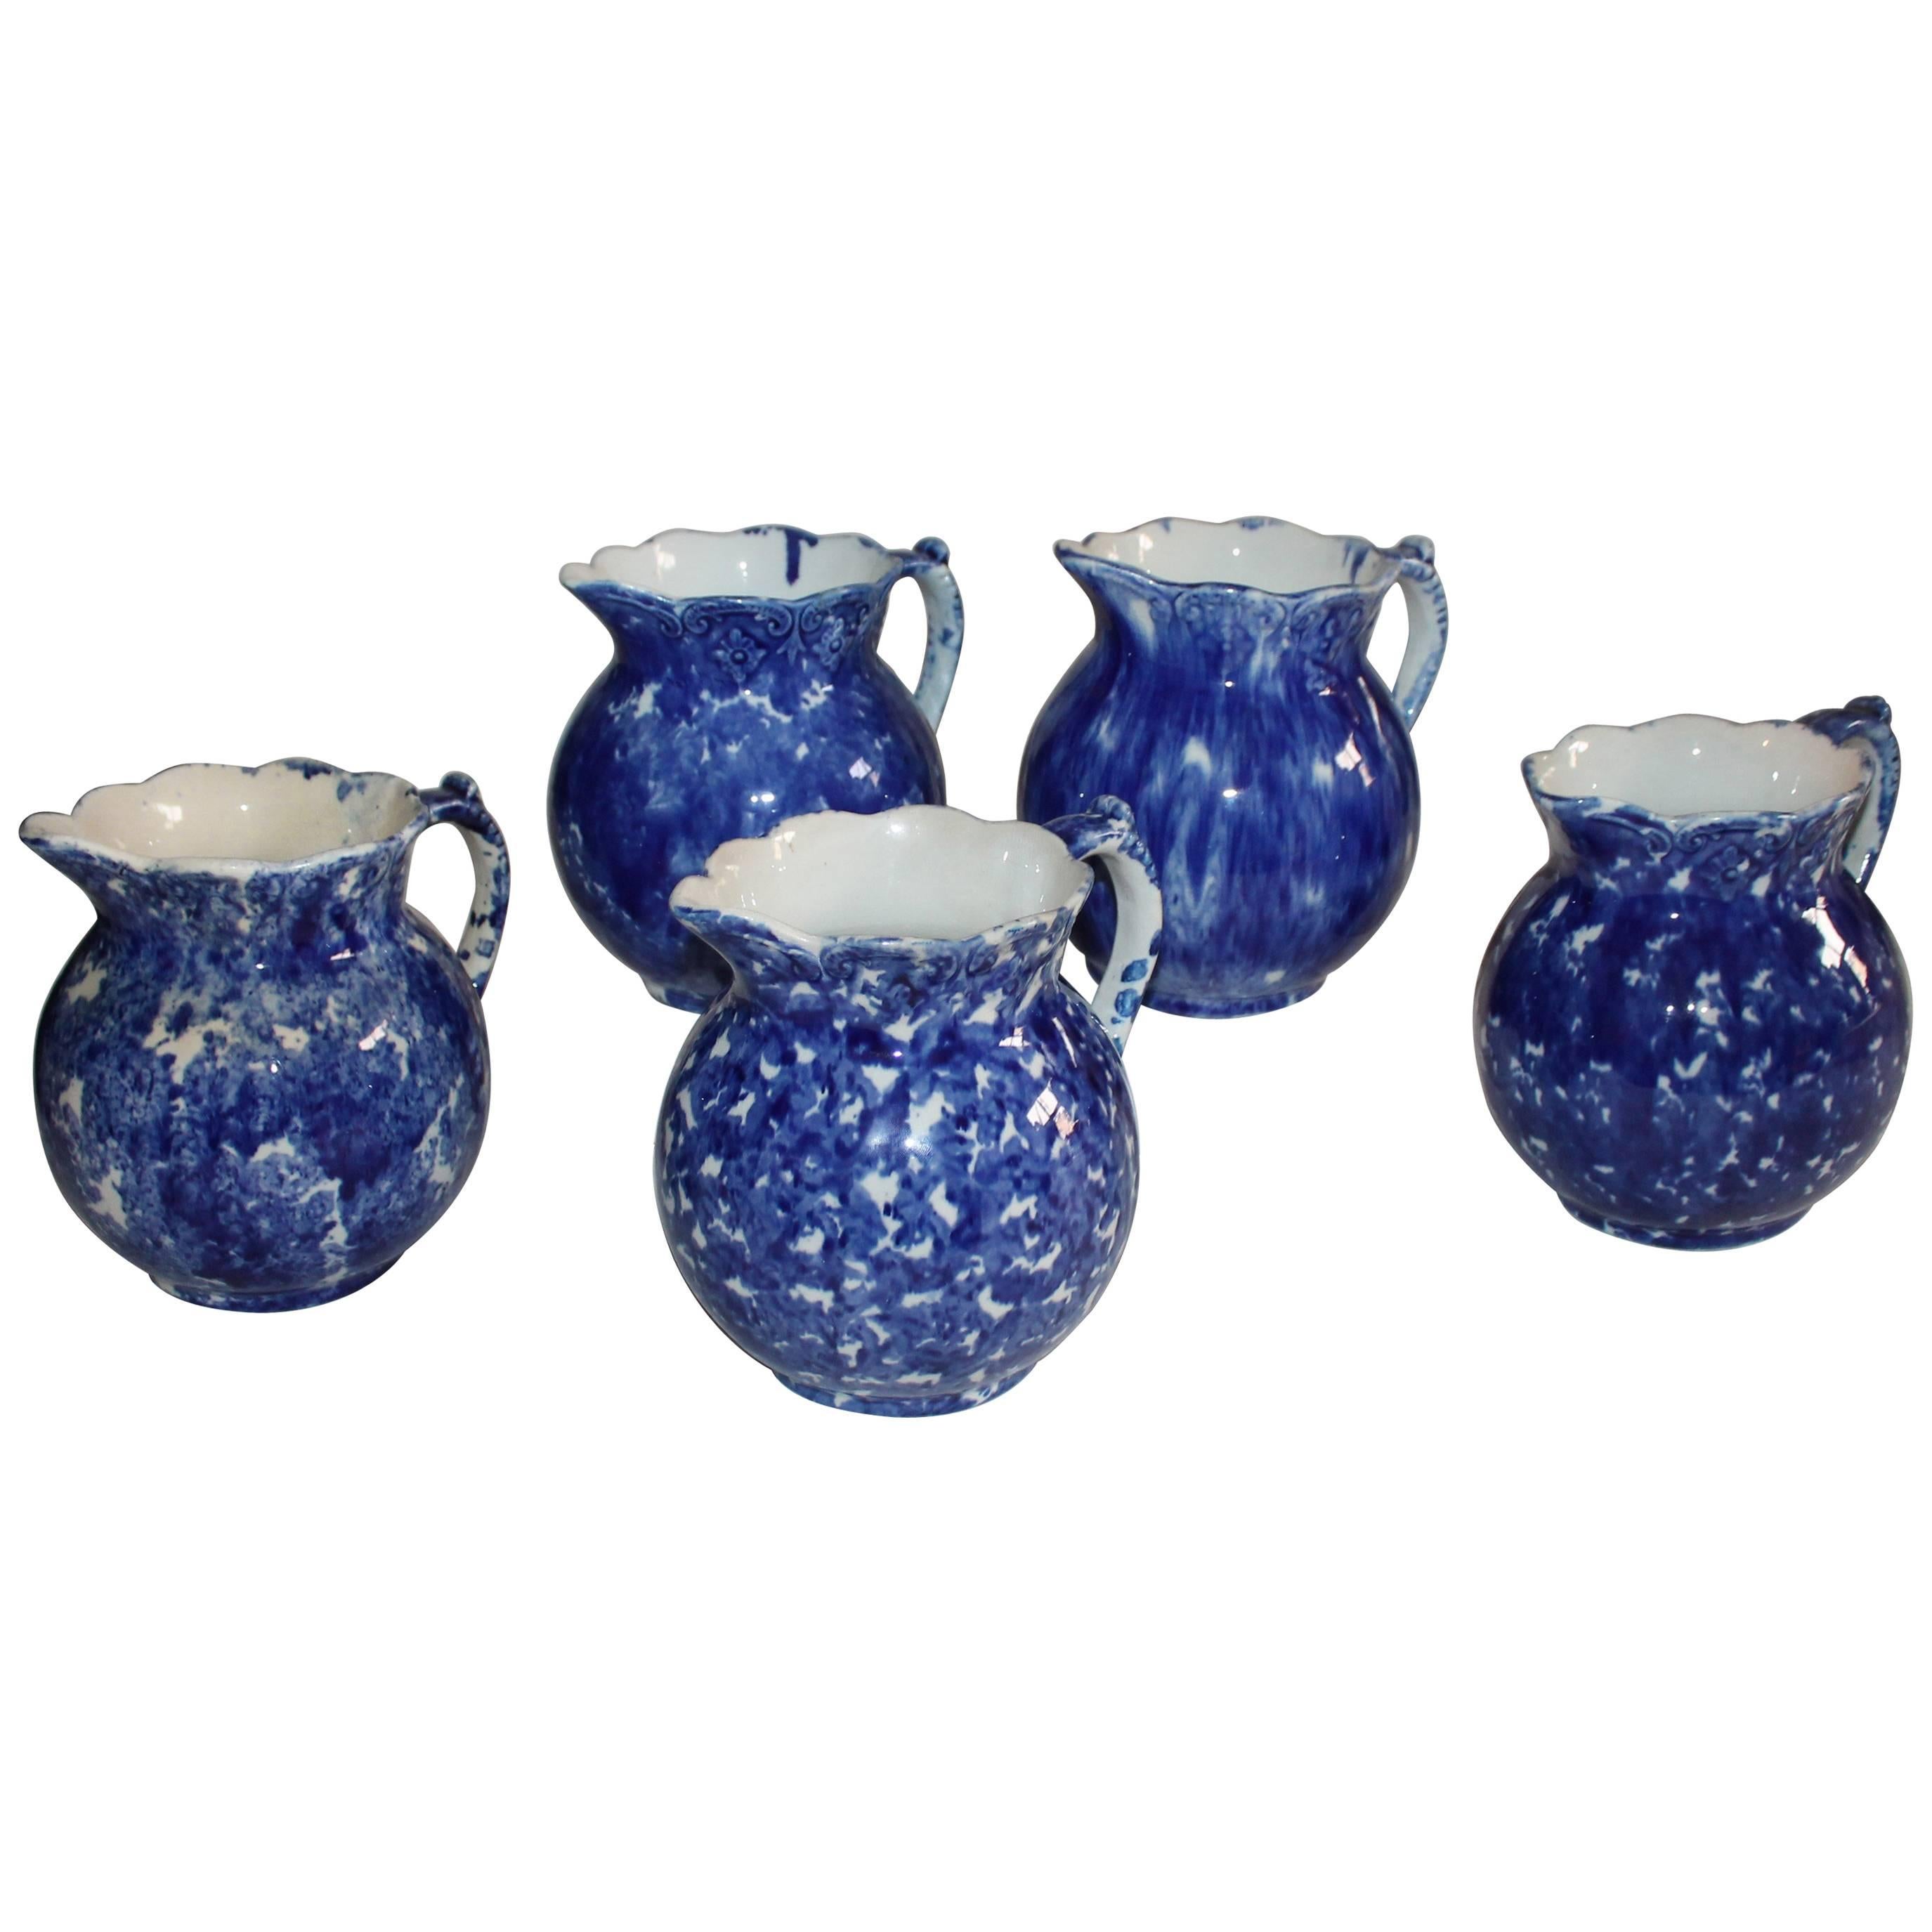 Spongeware Pitchers / Collection of Five, 19th Century